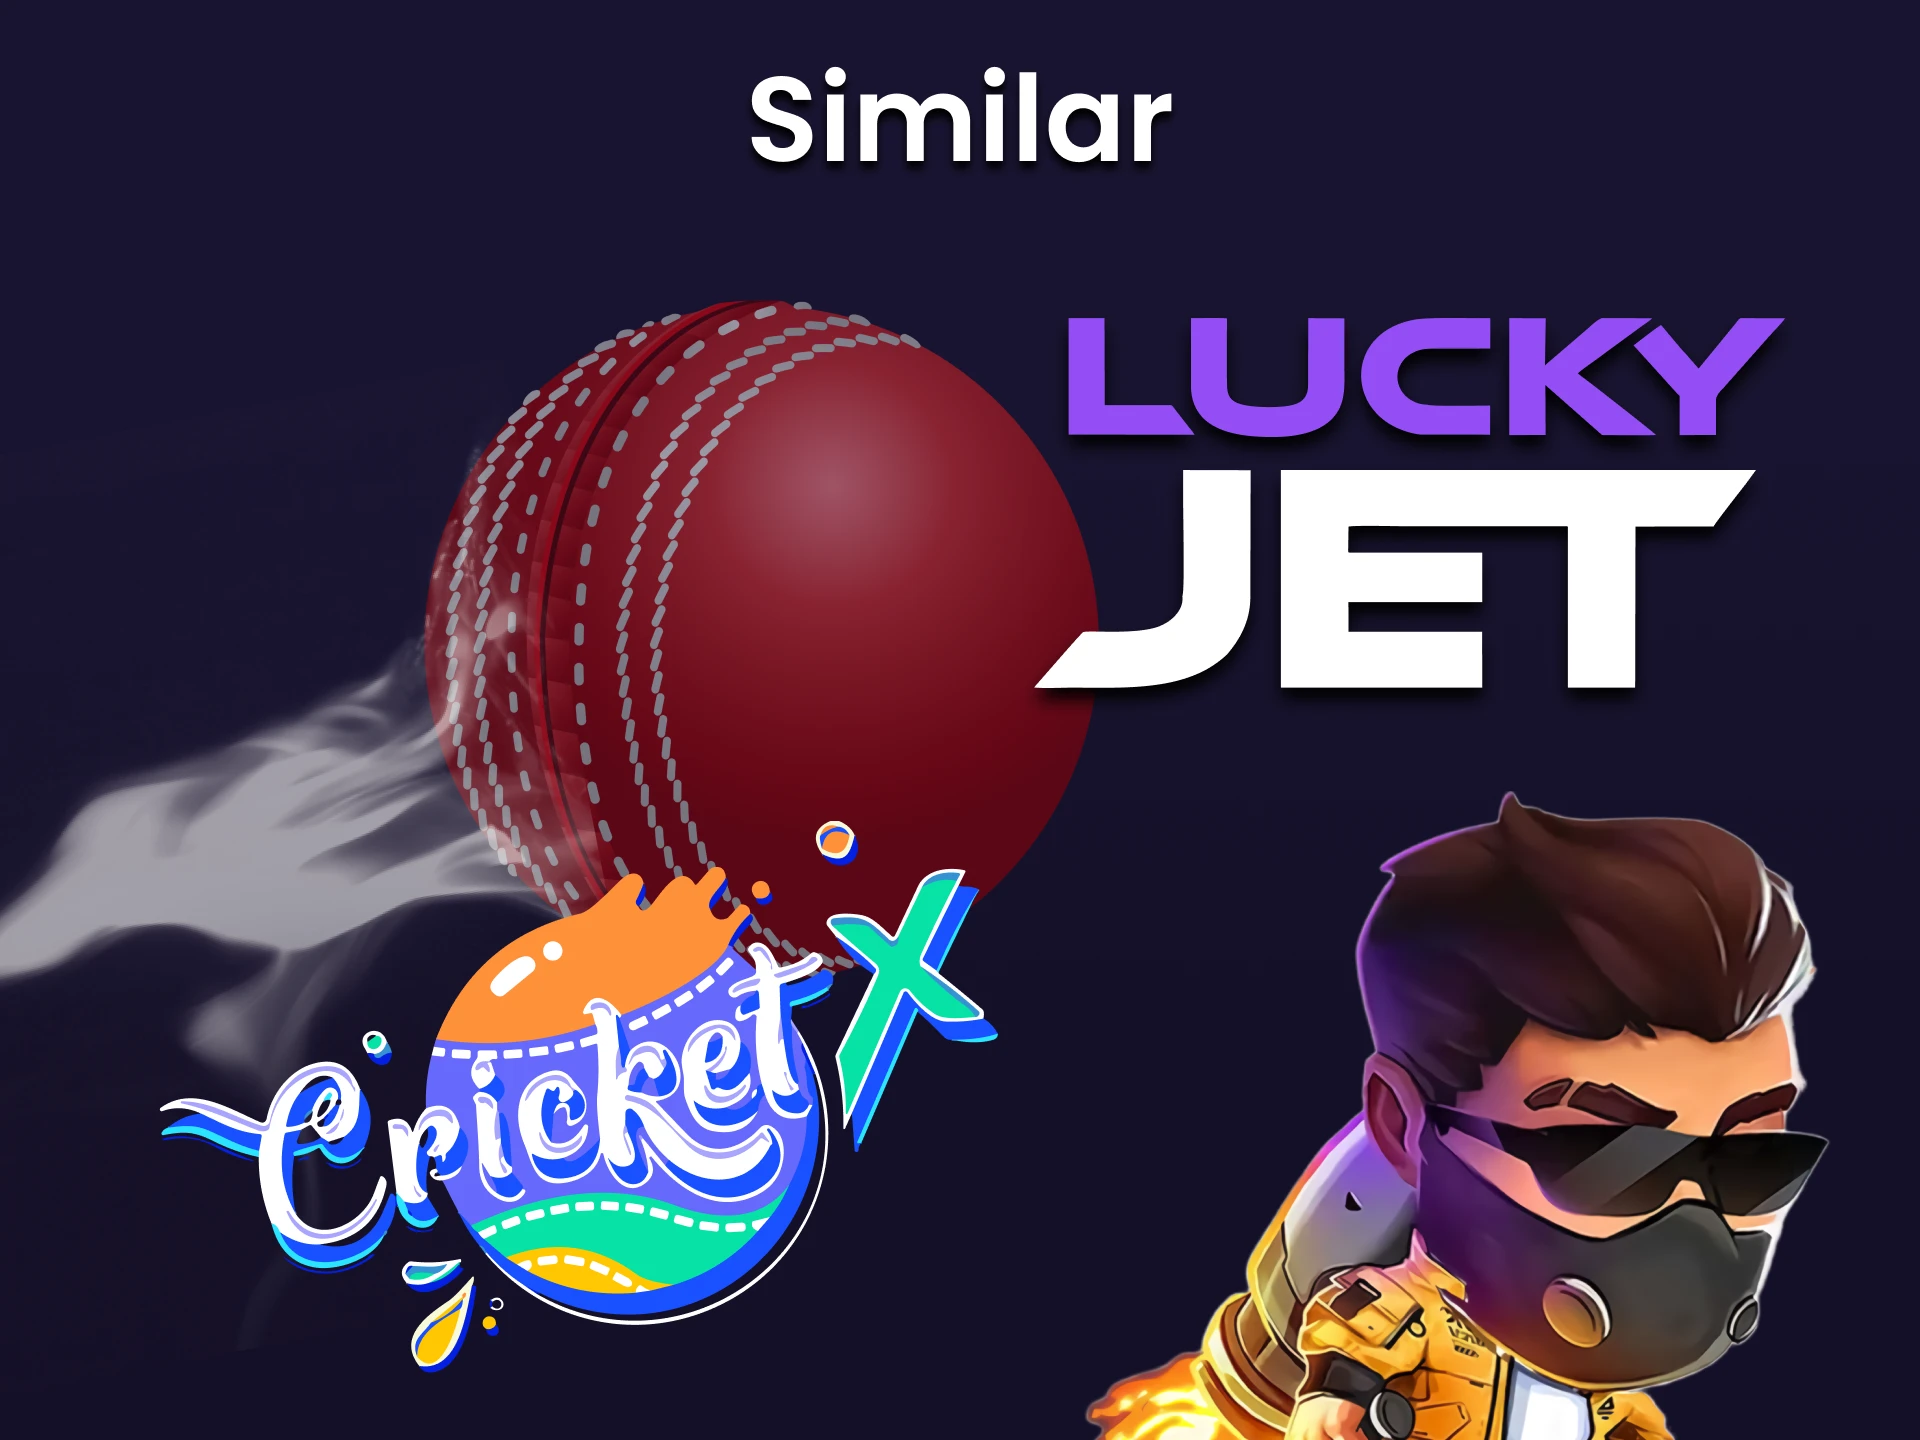 We will tell you how the games Cricket X and Lucky Jet are similar.